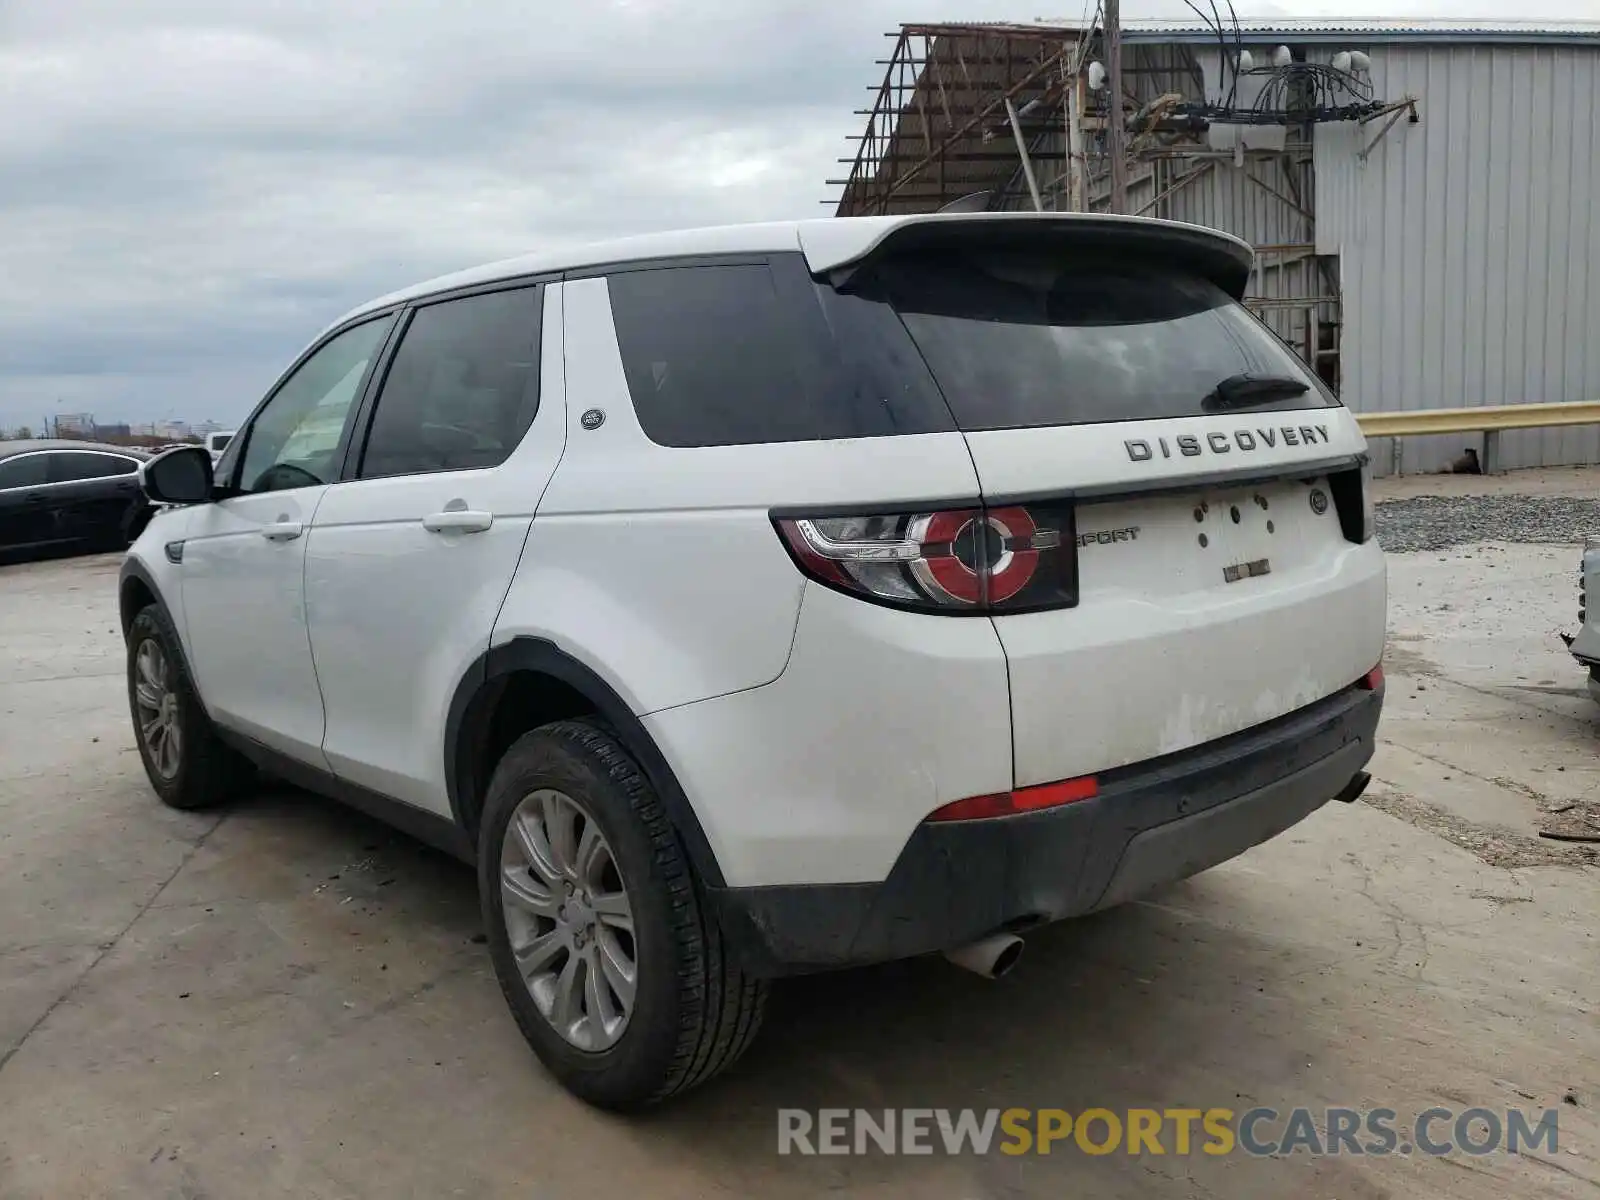 3 Photograph of a damaged car SALCP2FX6KH815485 LAND ROVER DISCOVERY 2019